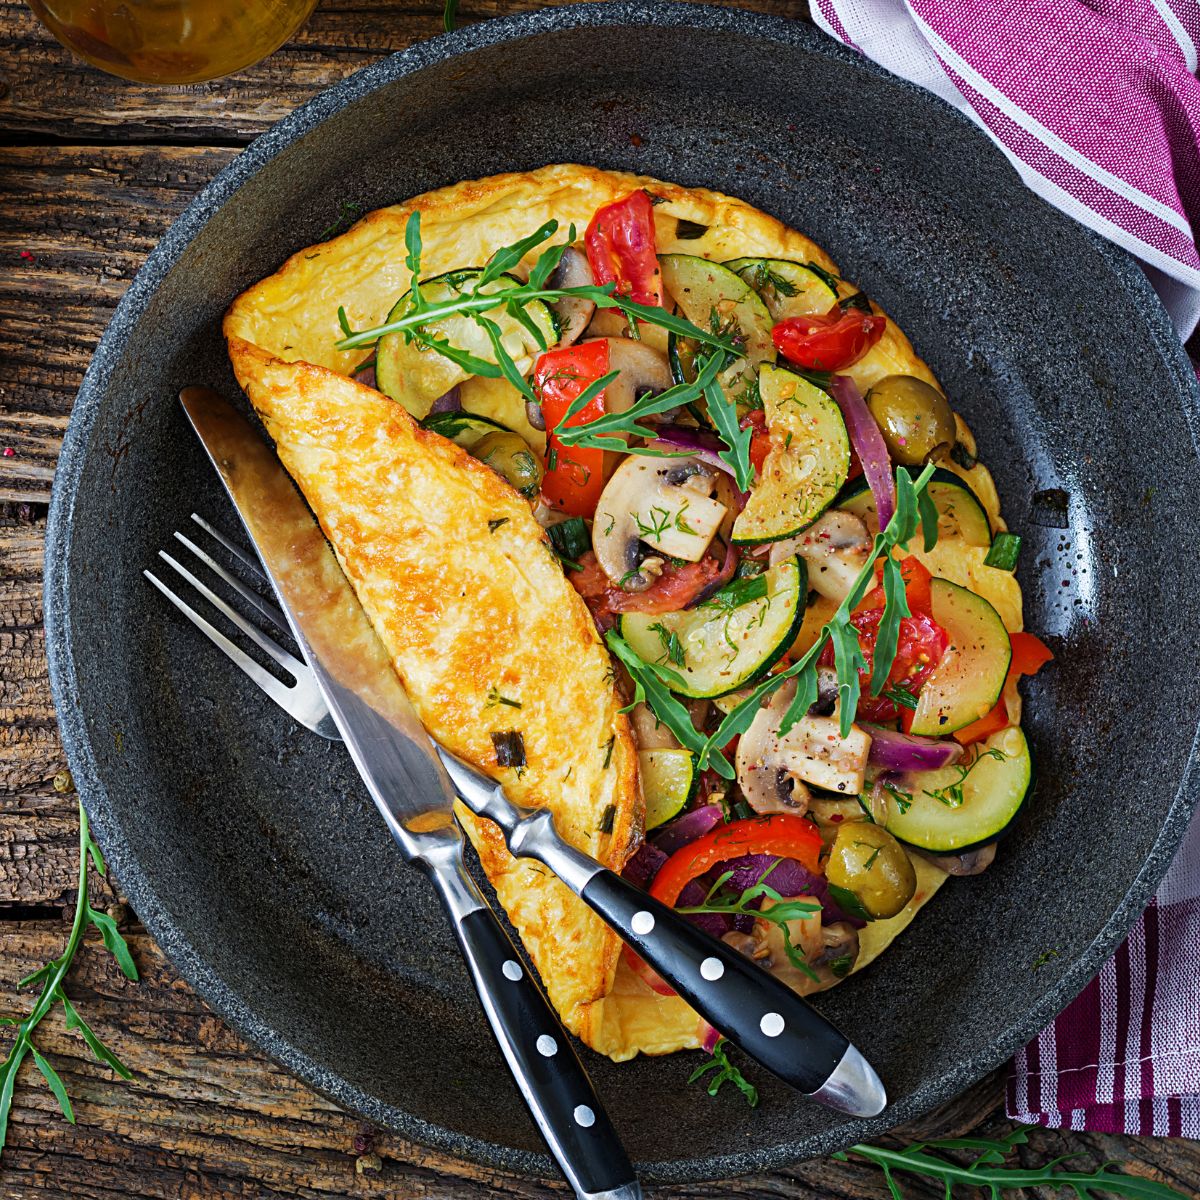 a healthy omelet with lots of colorful veggies.